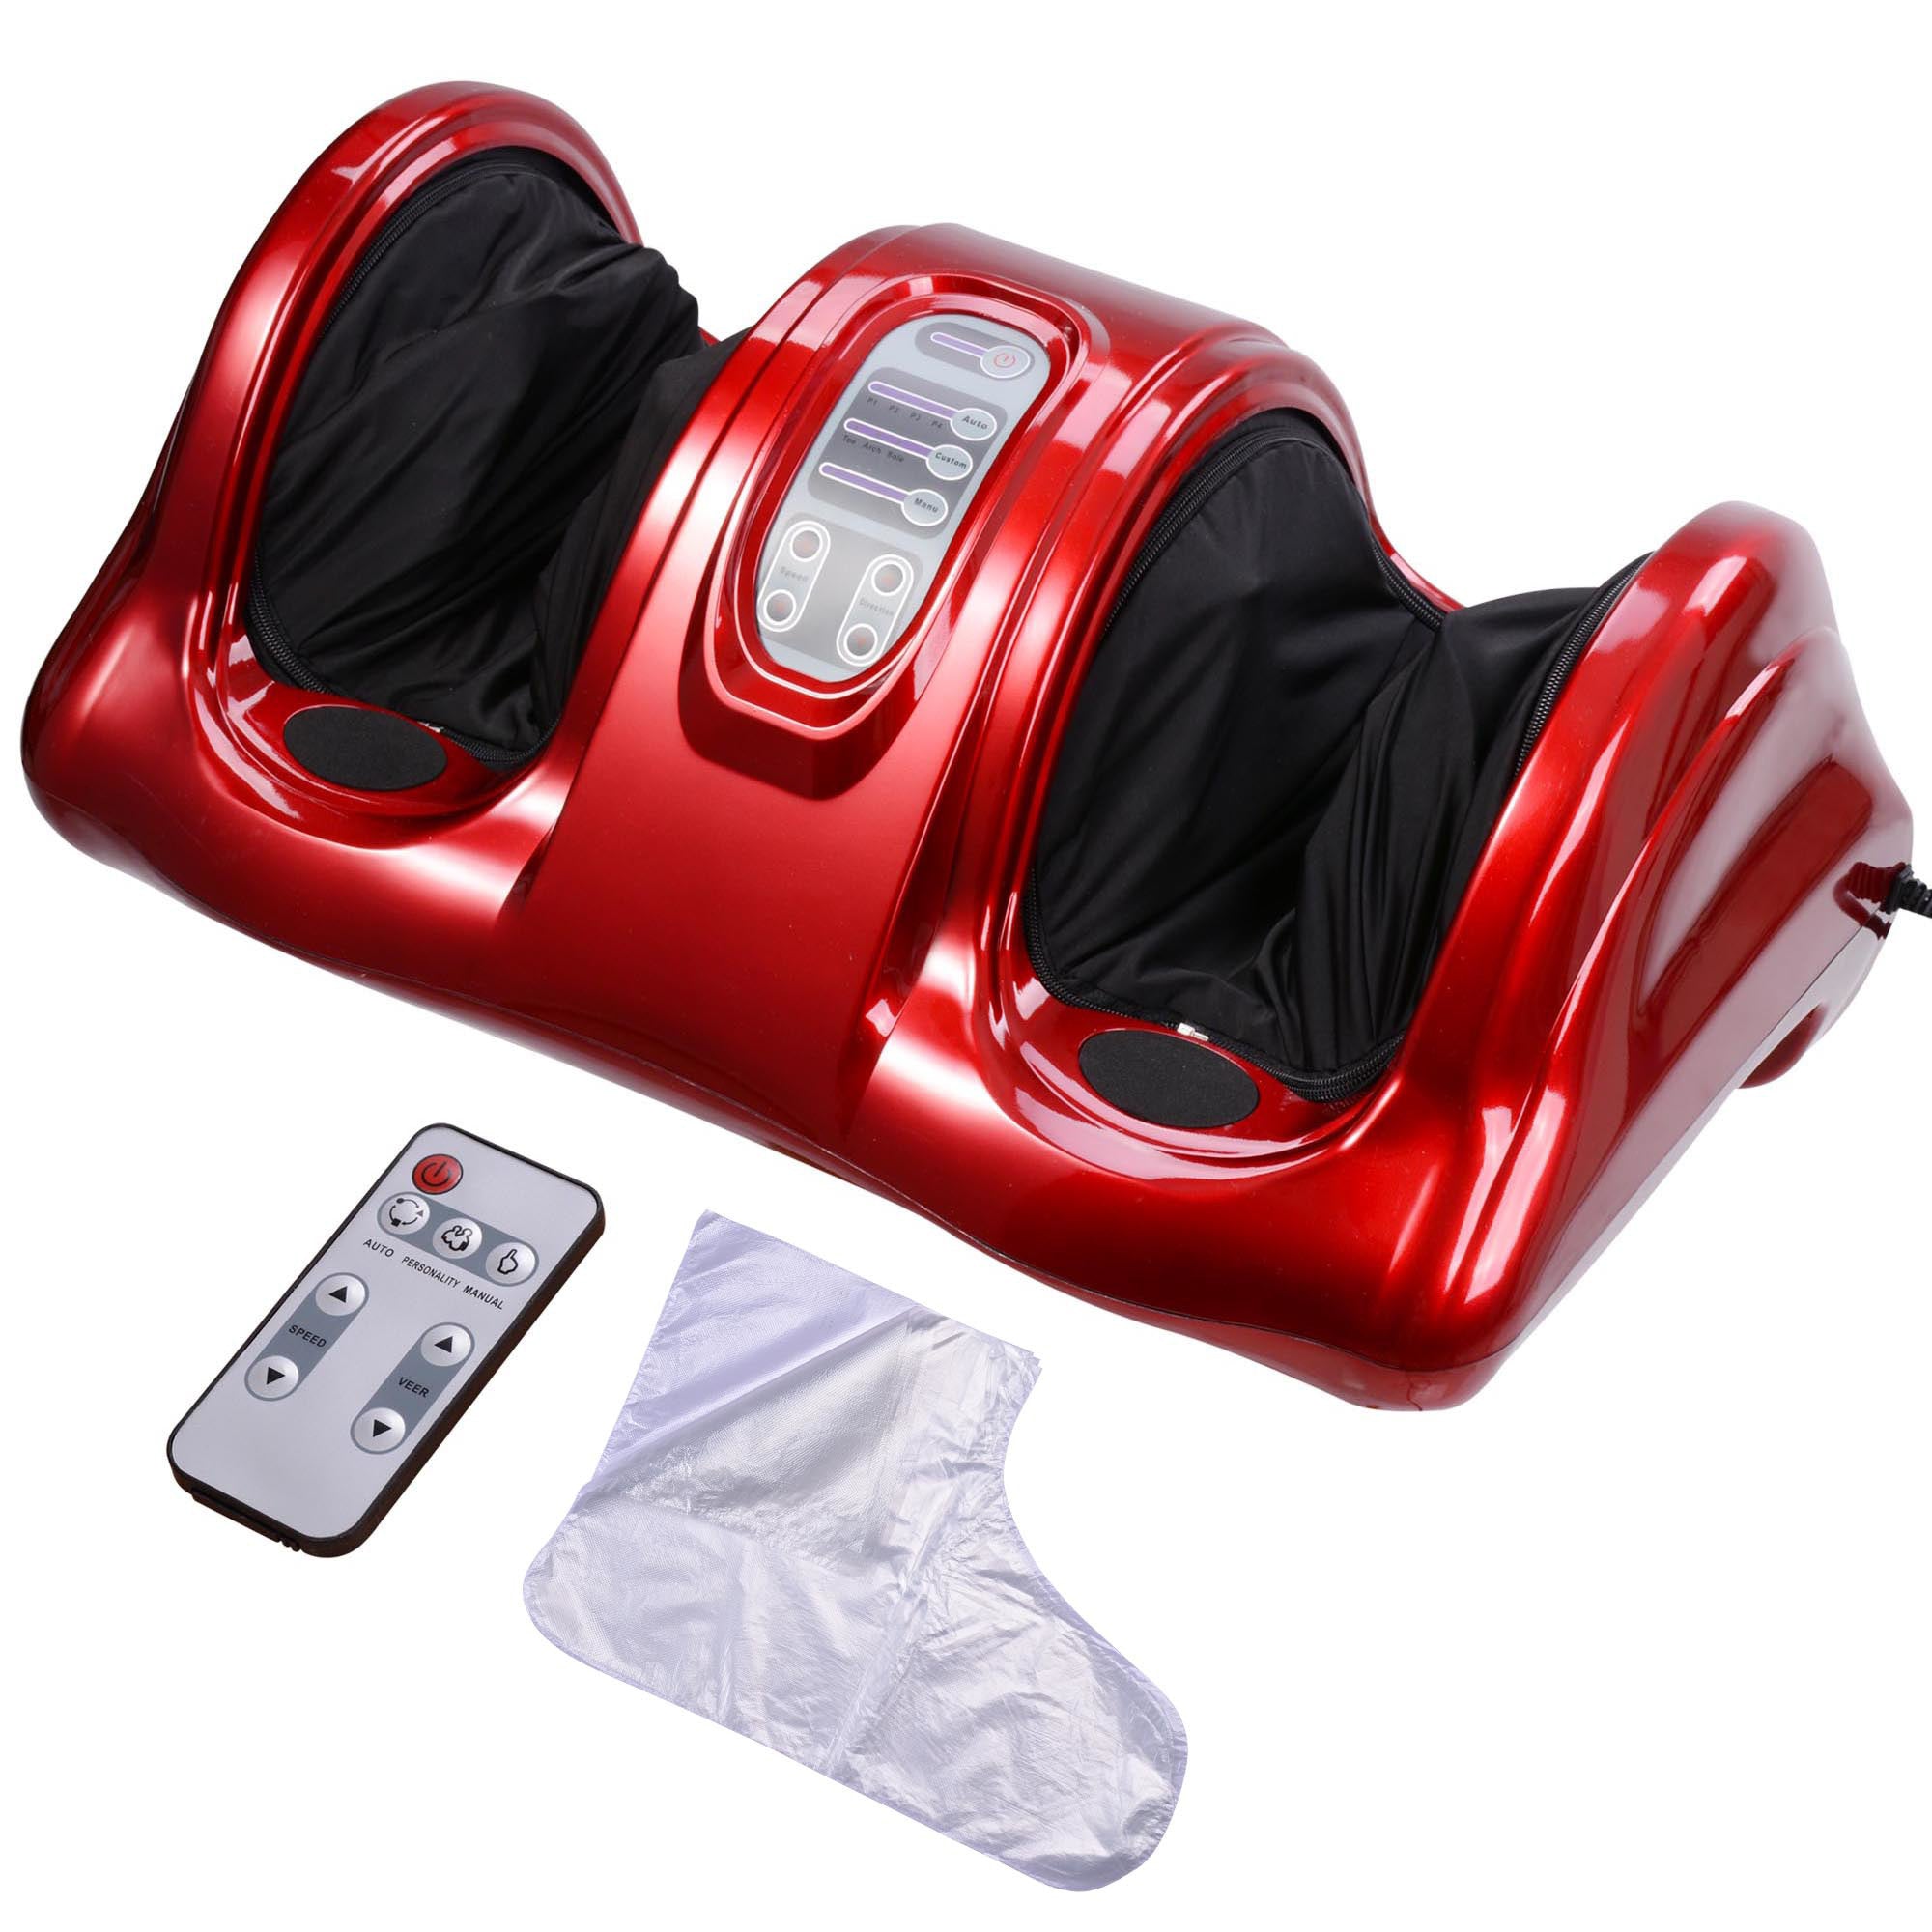 Image of Foot Massager and a remote control